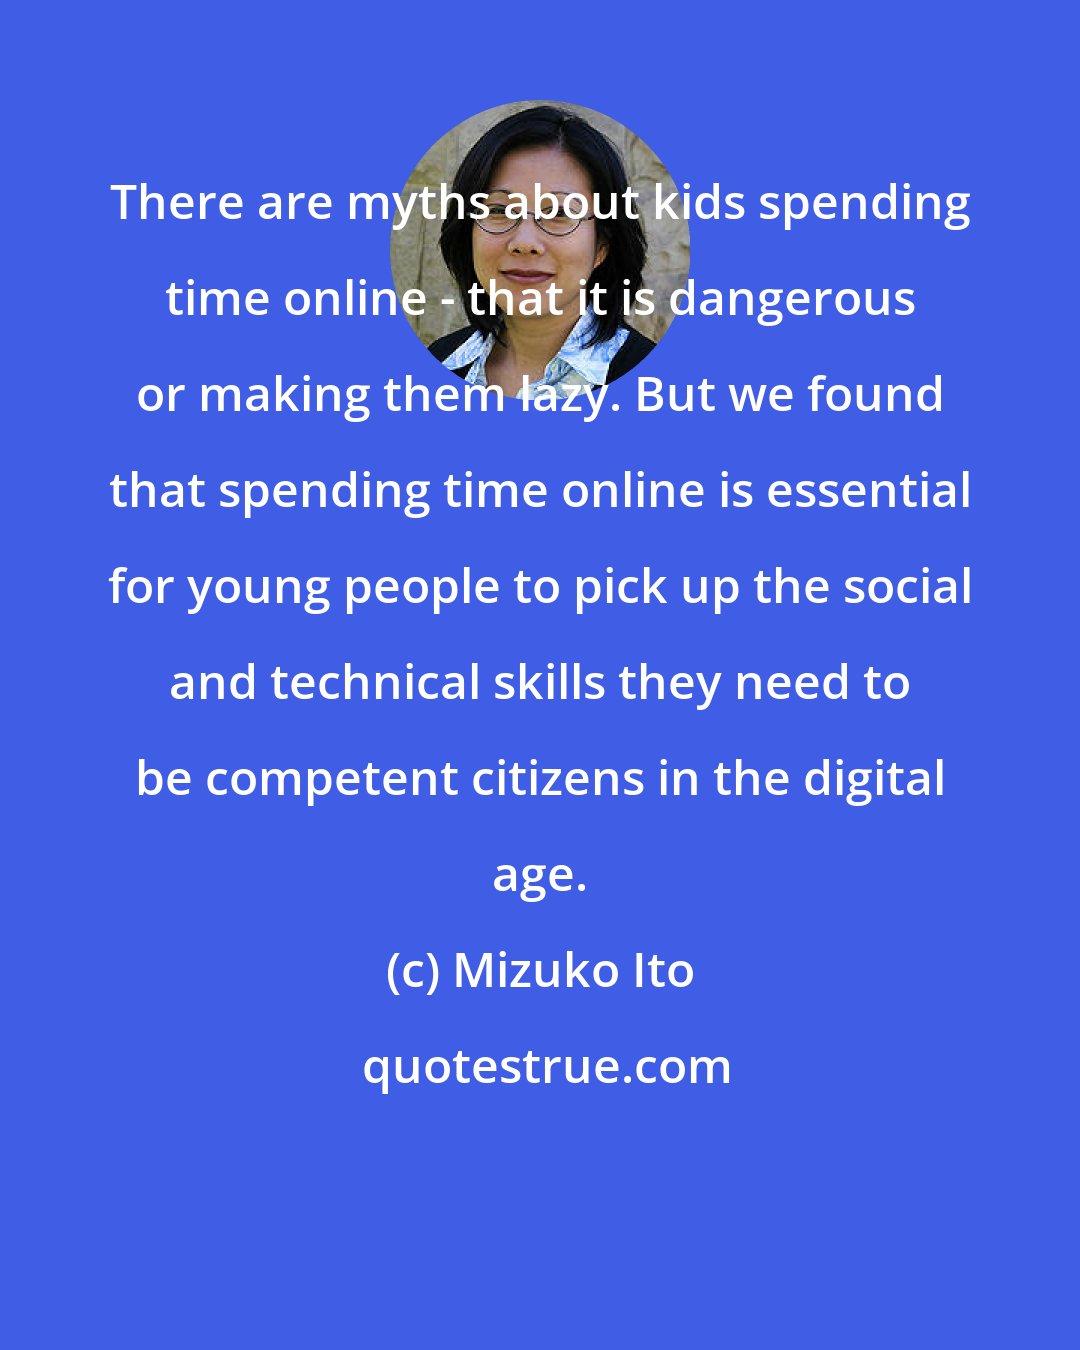 Mizuko Ito: There are myths about kids spending time online - that it is dangerous or making them lazy. But we found that spending time online is essential for young people to pick up the social and technical skills they need to be competent citizens in the digital age.